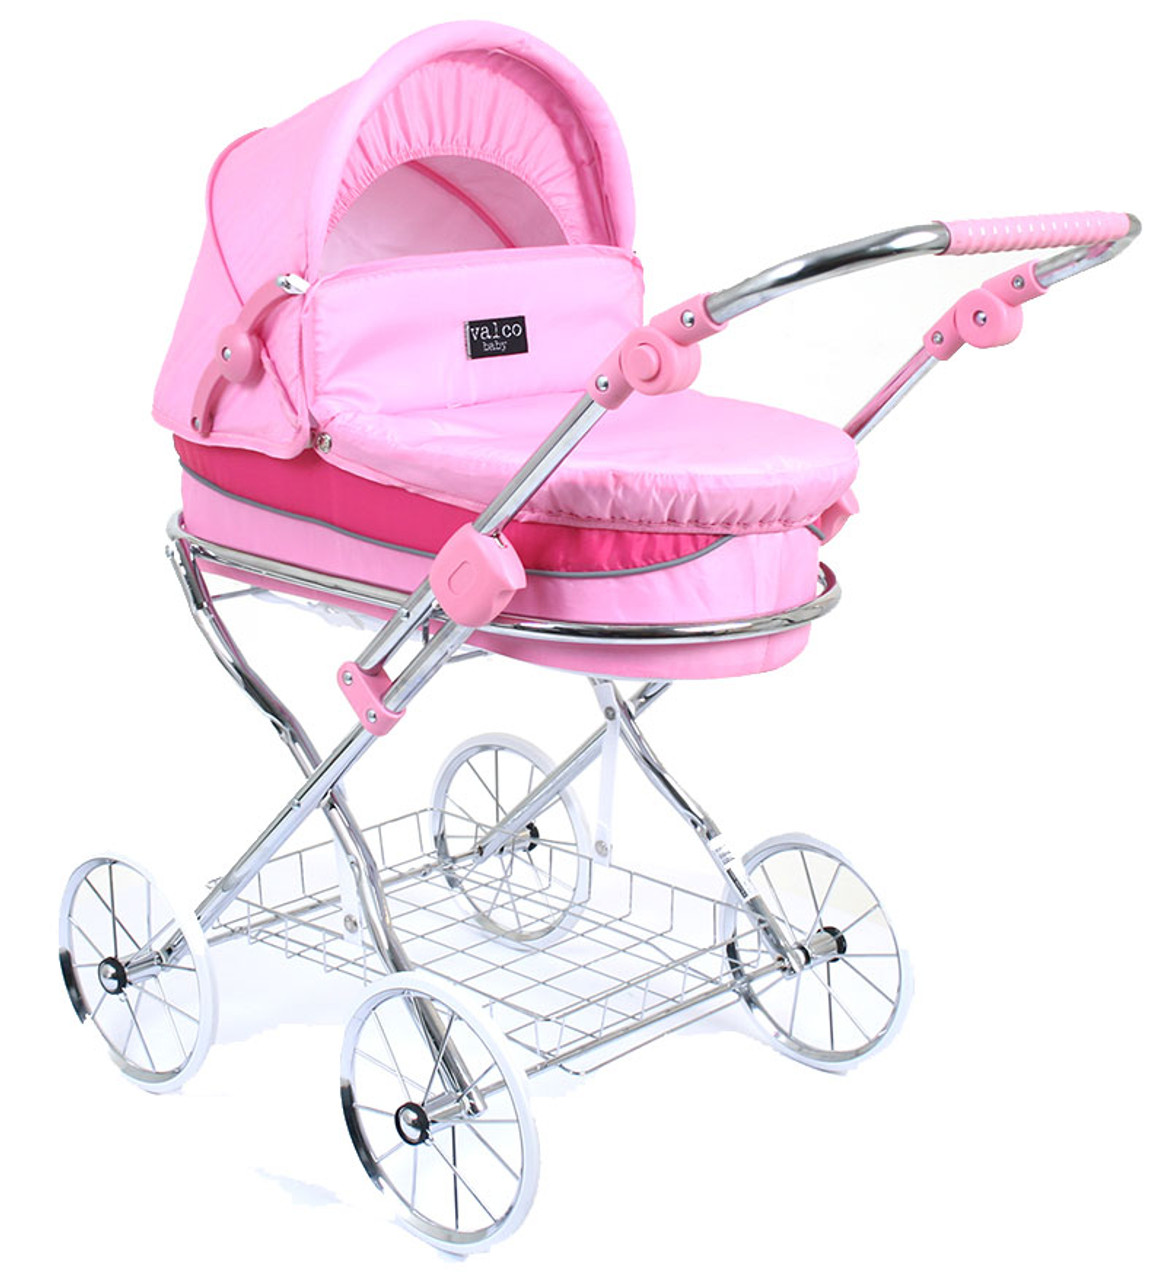 dolls pram suitable for 1 year old